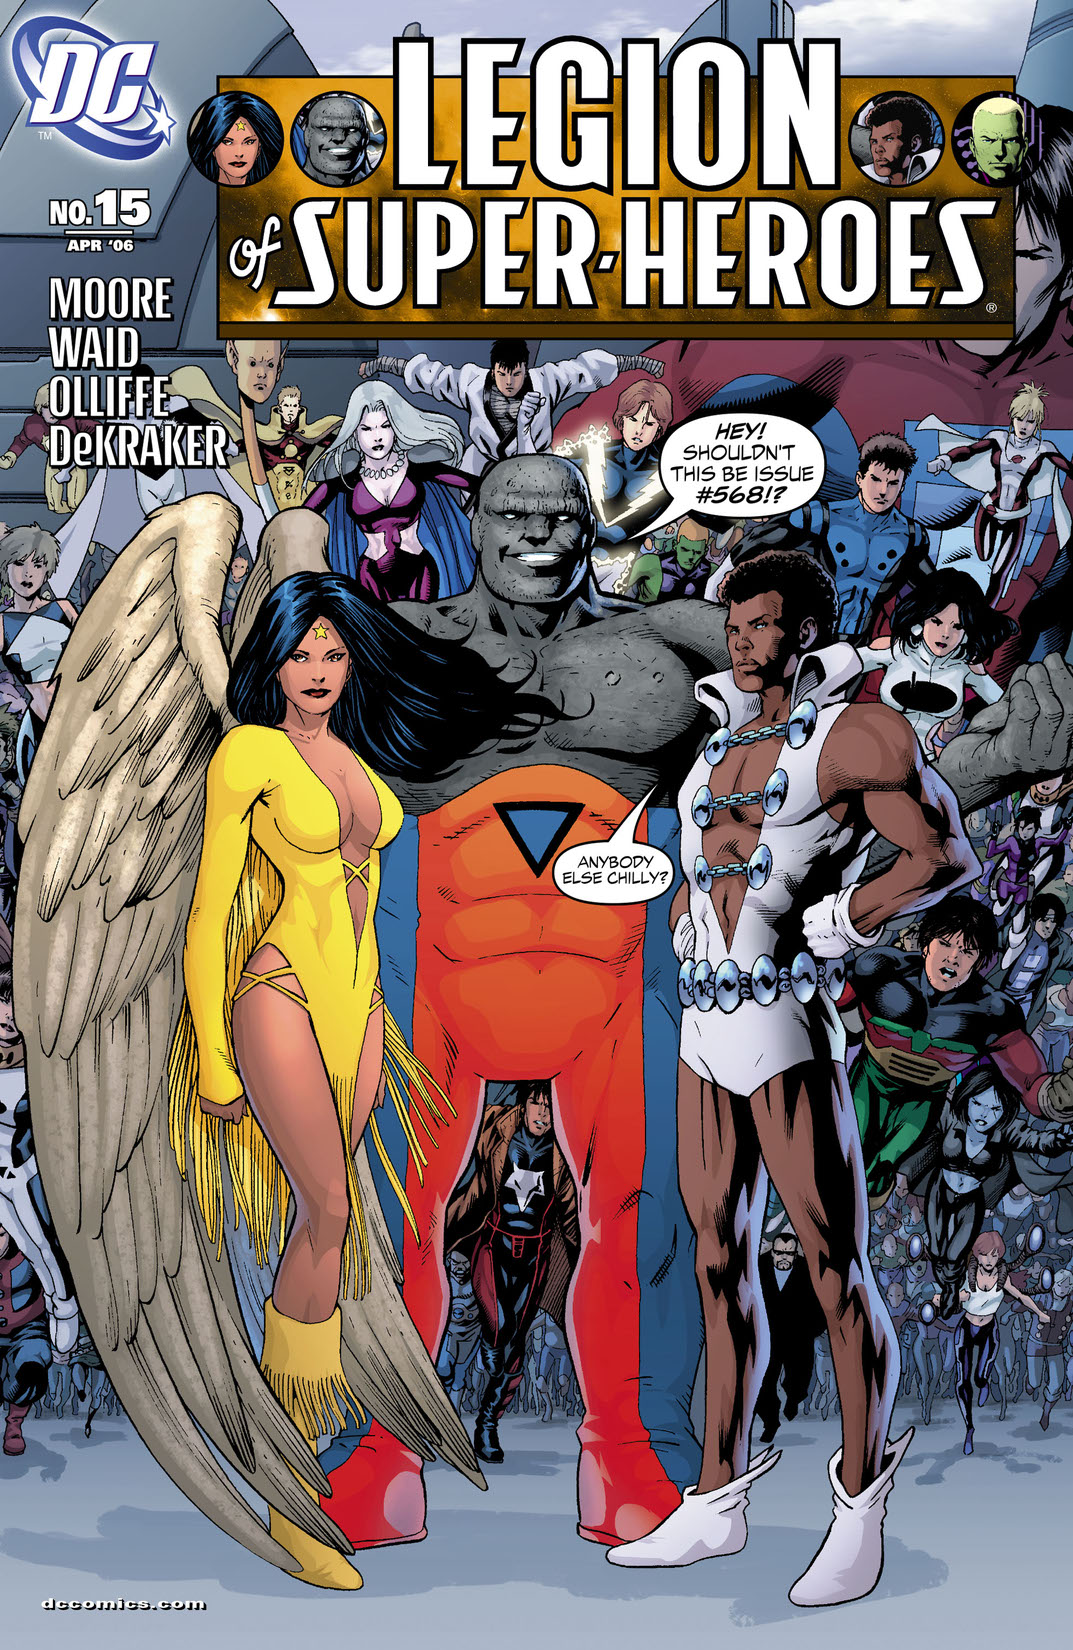 Legion of Super Heroes (2004-) #15 preview images